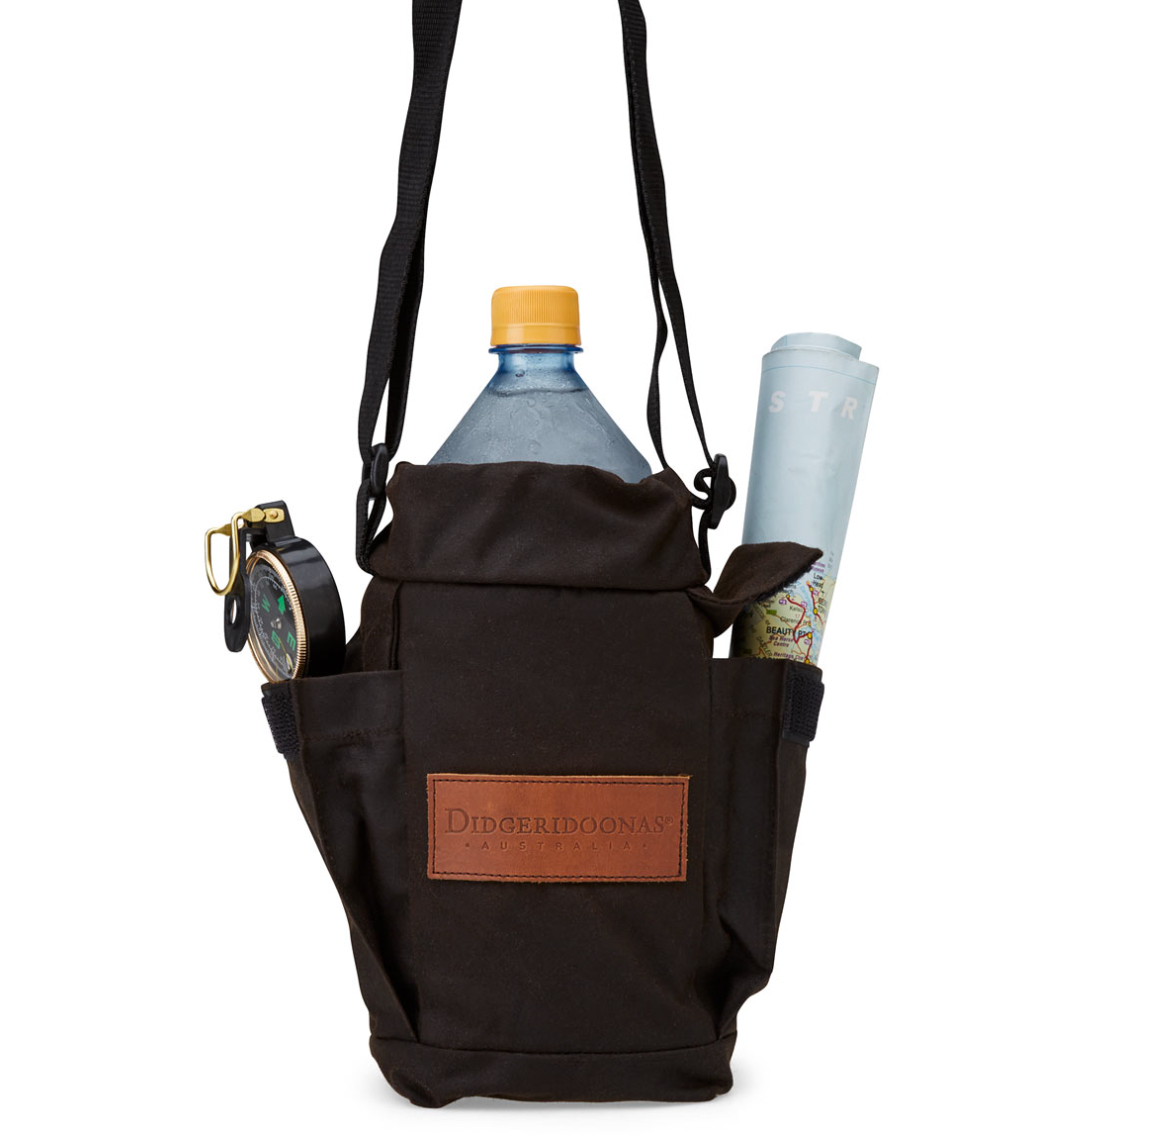 The Ultimate Outdoors Companion: The Walkabout Cooler Bag